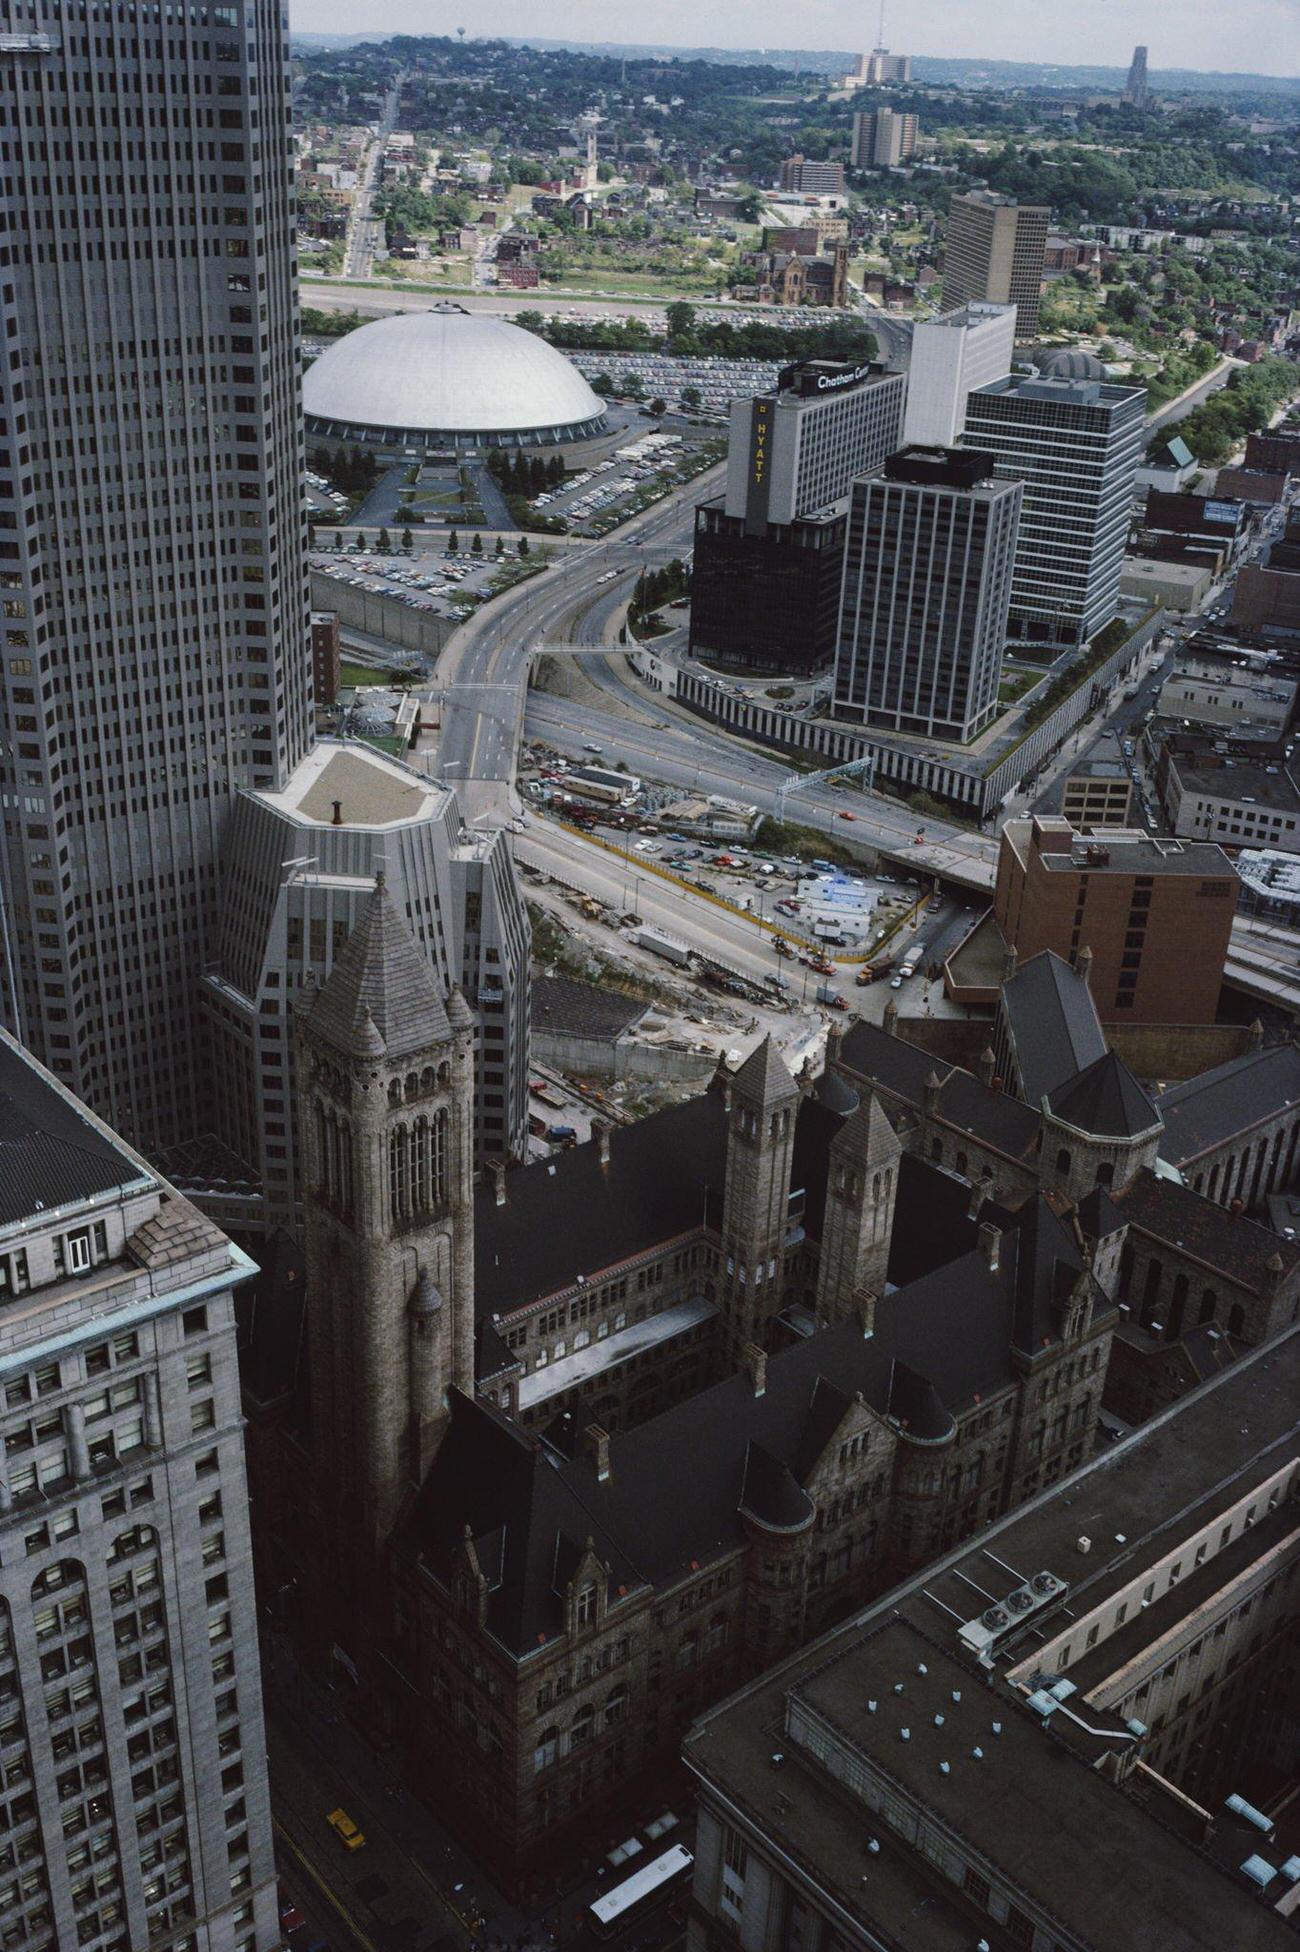 Pittsburgh skyline with Allegheny County Courthouse and Civic Area, 1983.